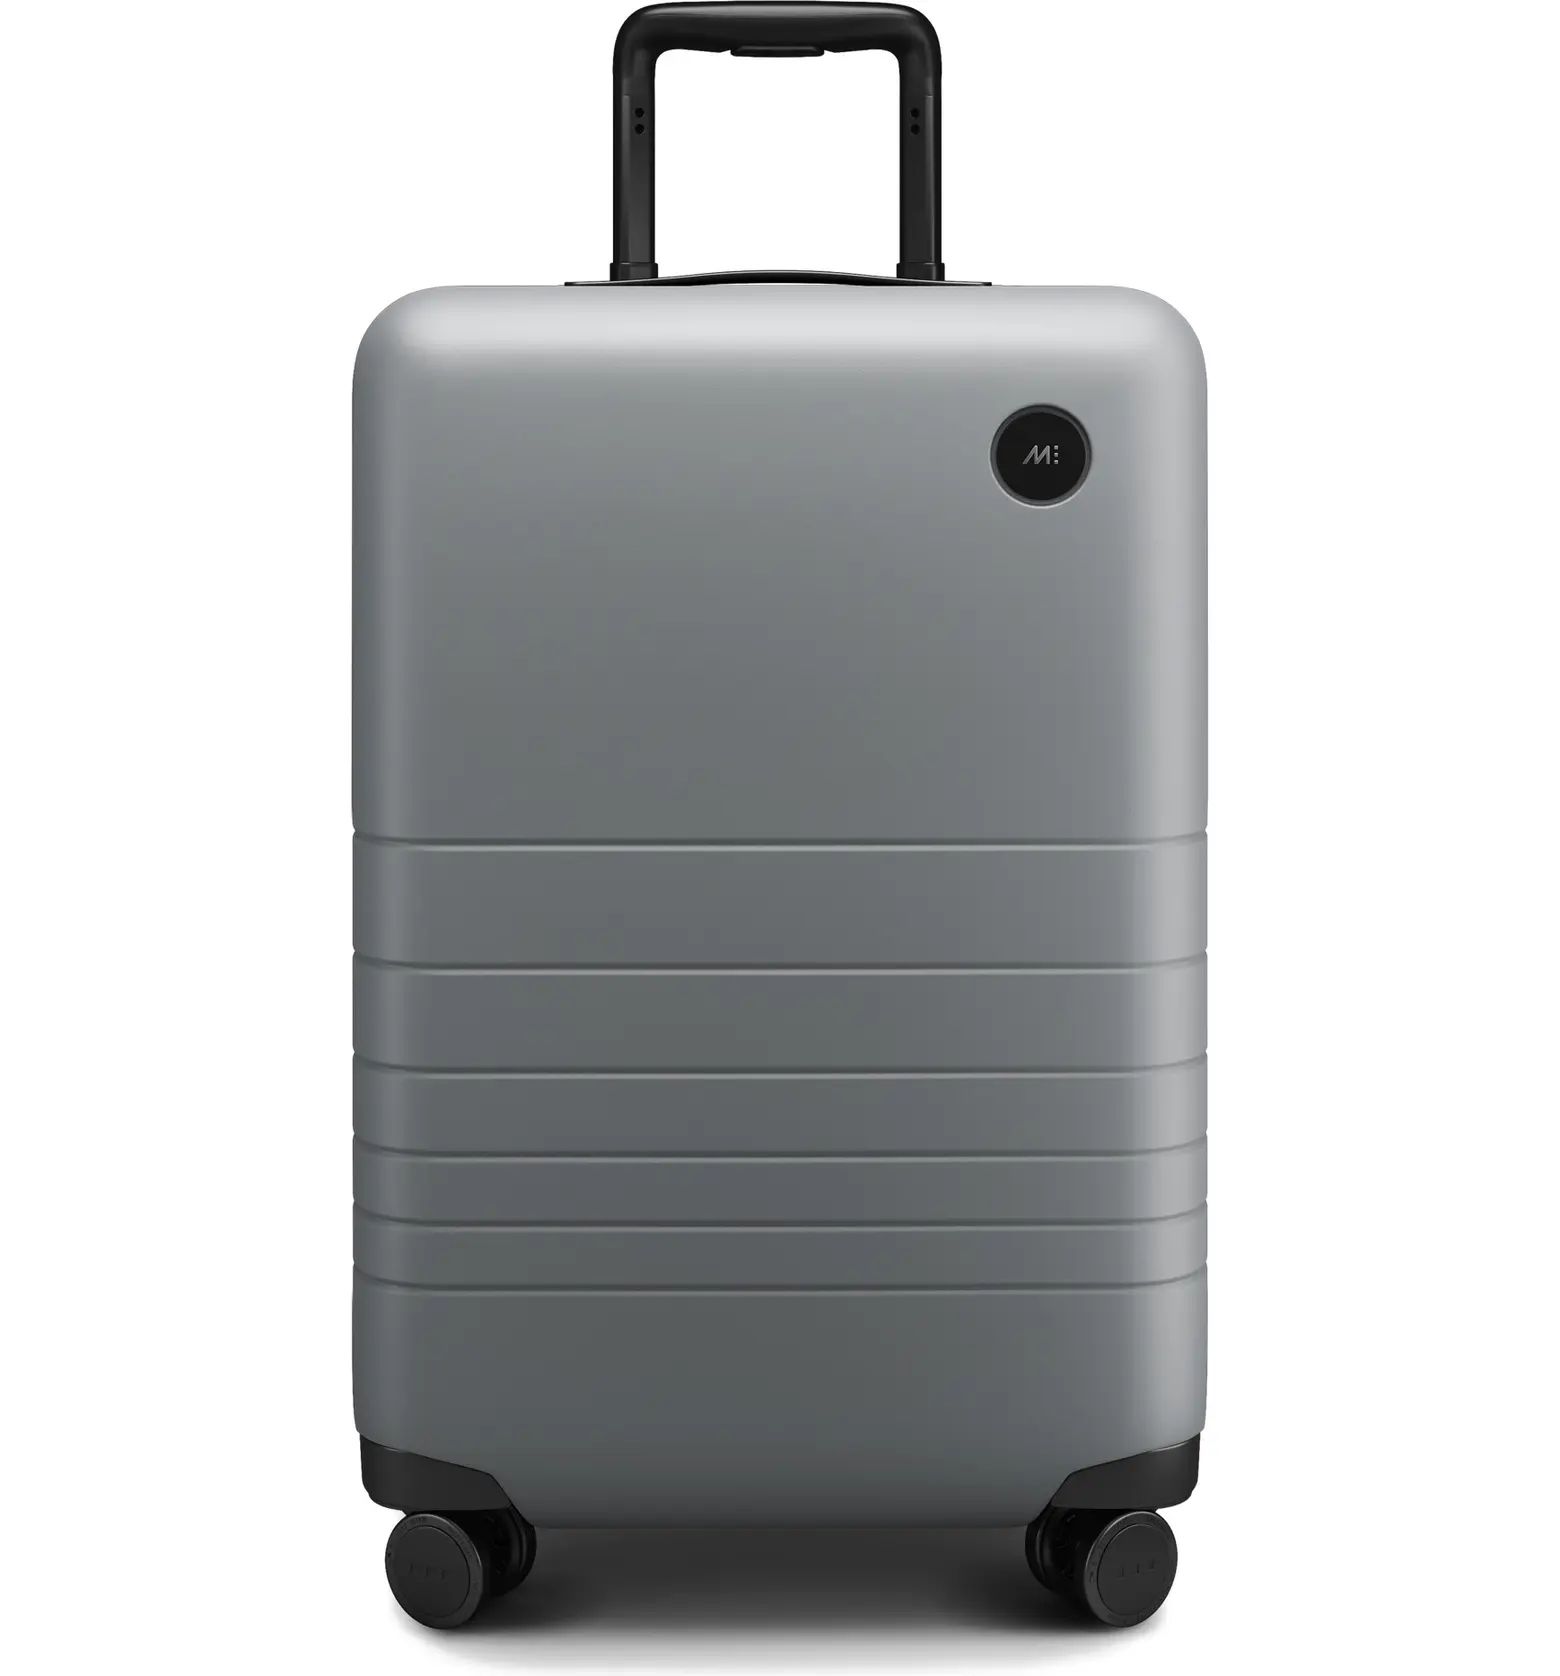 23-Inch Carry-On Plus Spinner Luggage | Nordstrom